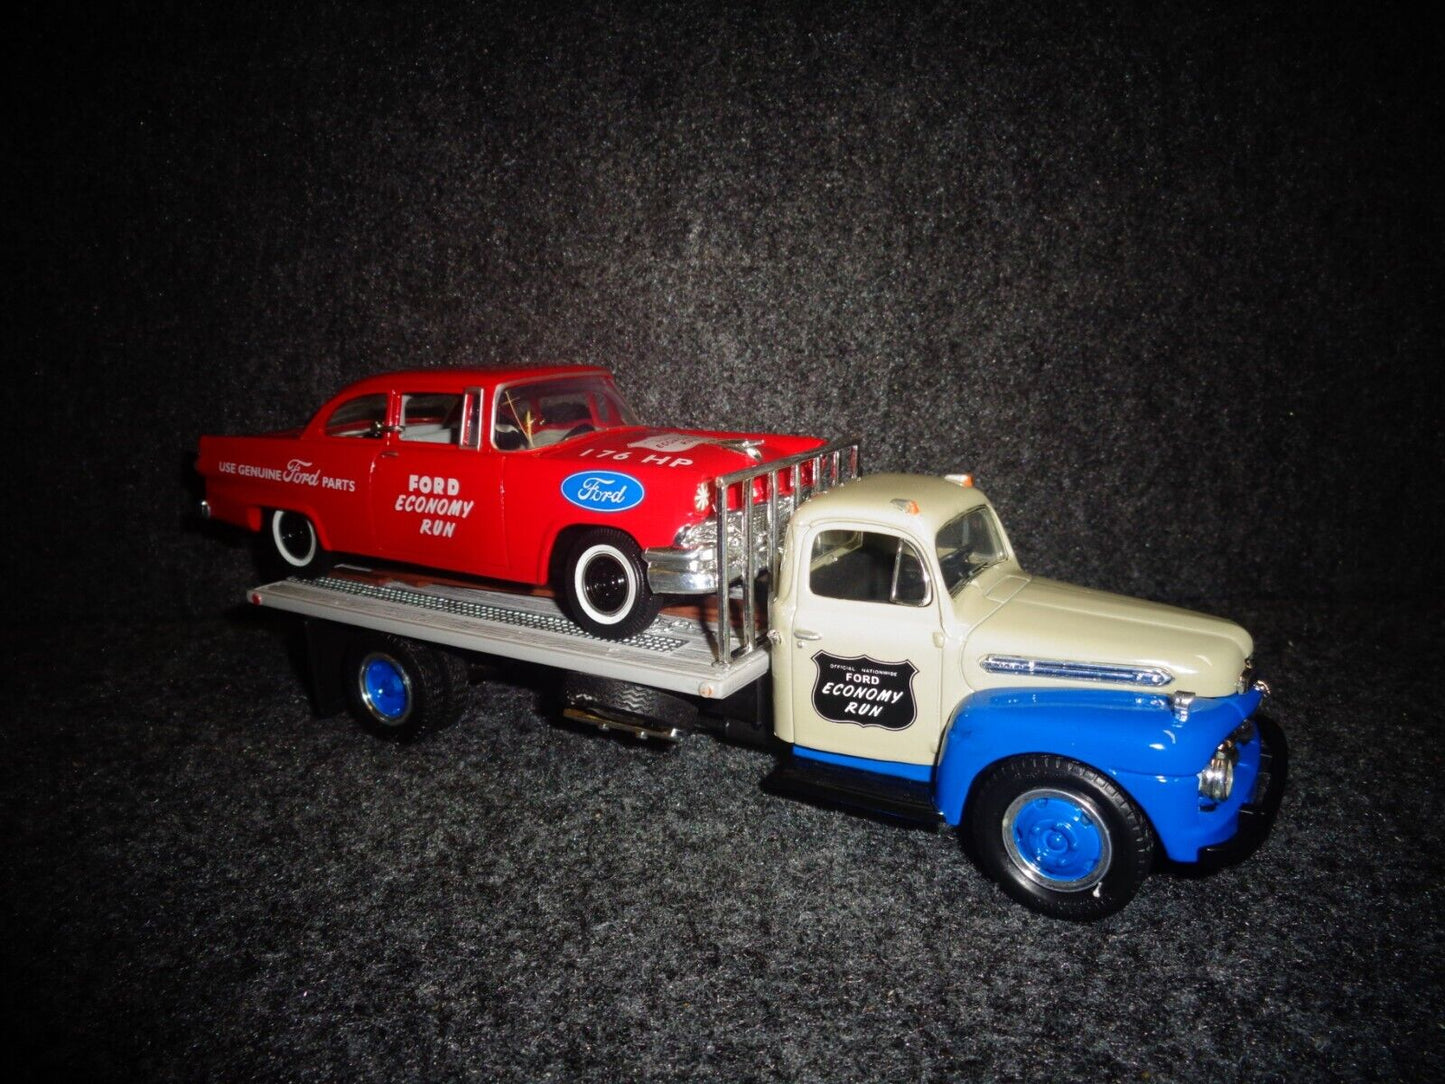 Ford Parts 1951 Ford F-6 Flatbed Truck & 1956 Ford Stock Car